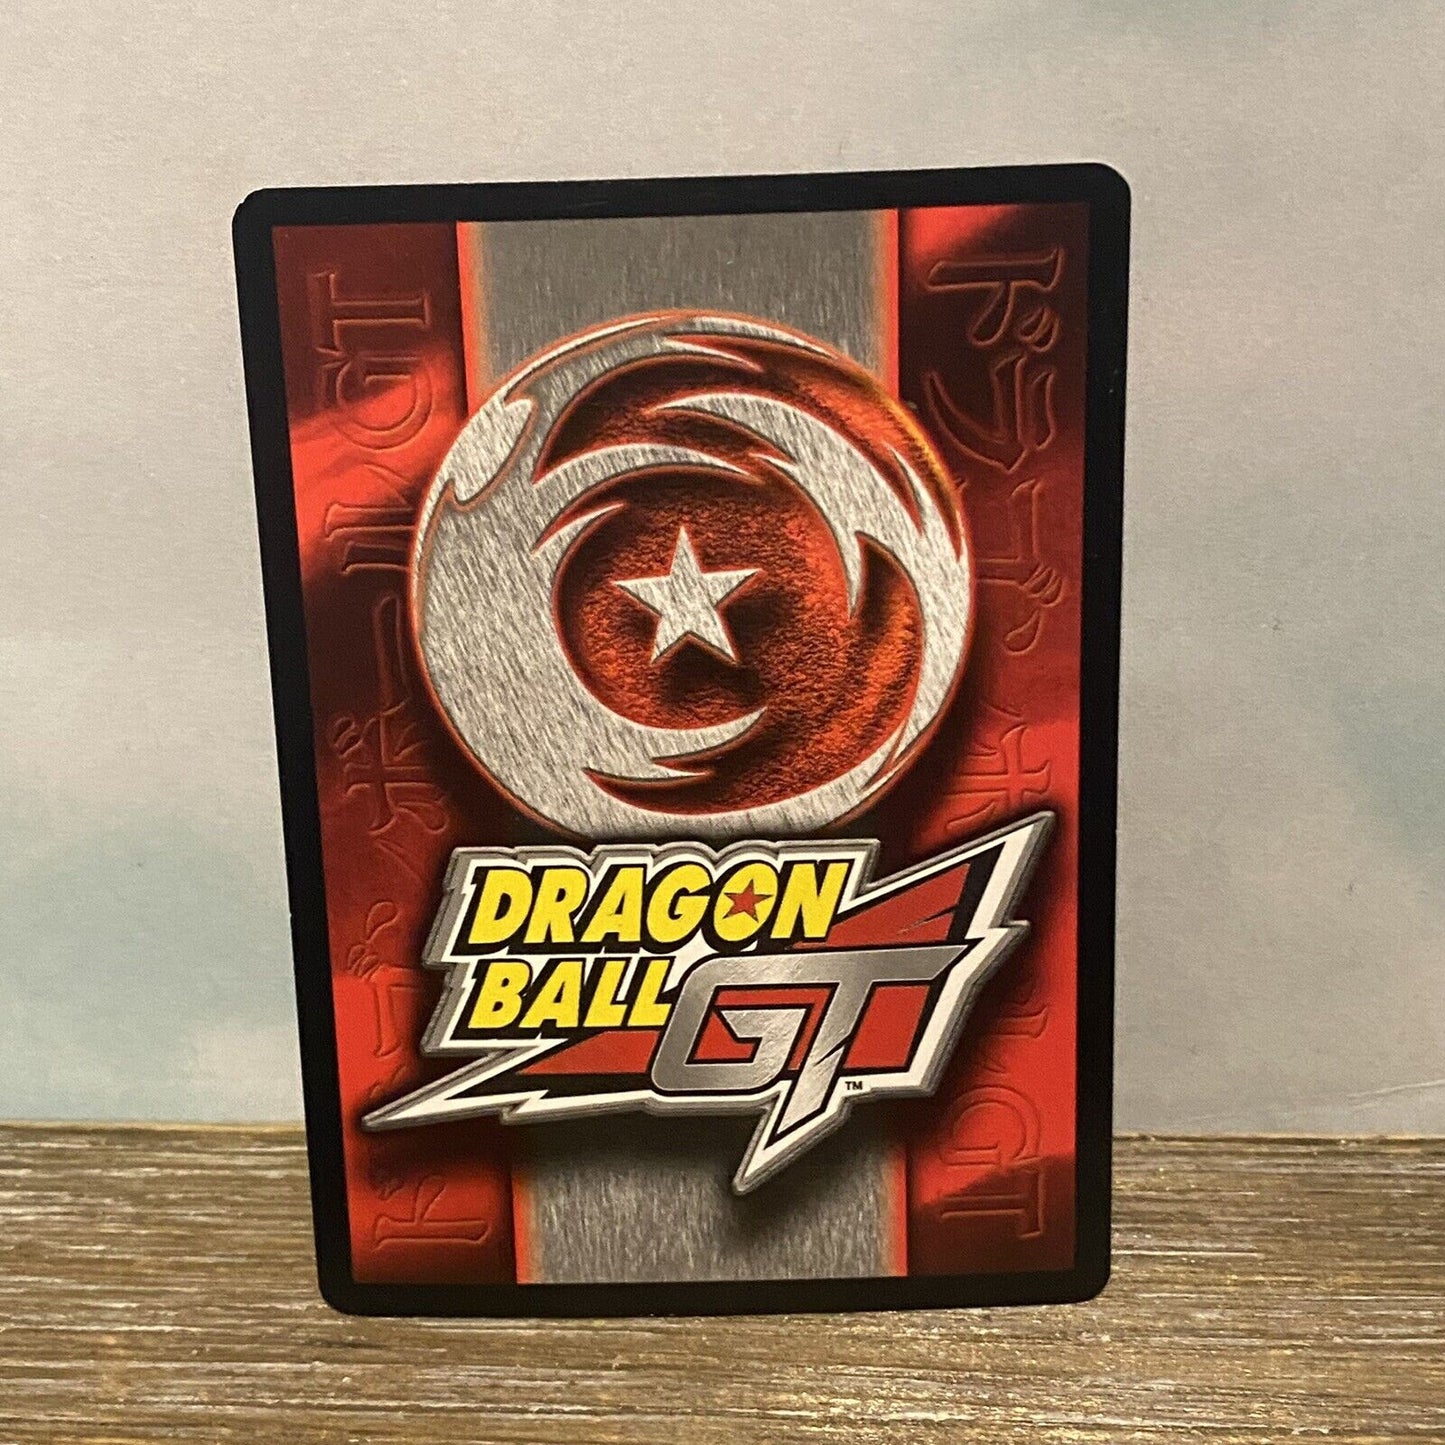 Dragonball Z GT TCG Android 20 The Genius Holo Foil Super Android Saga Uncommon